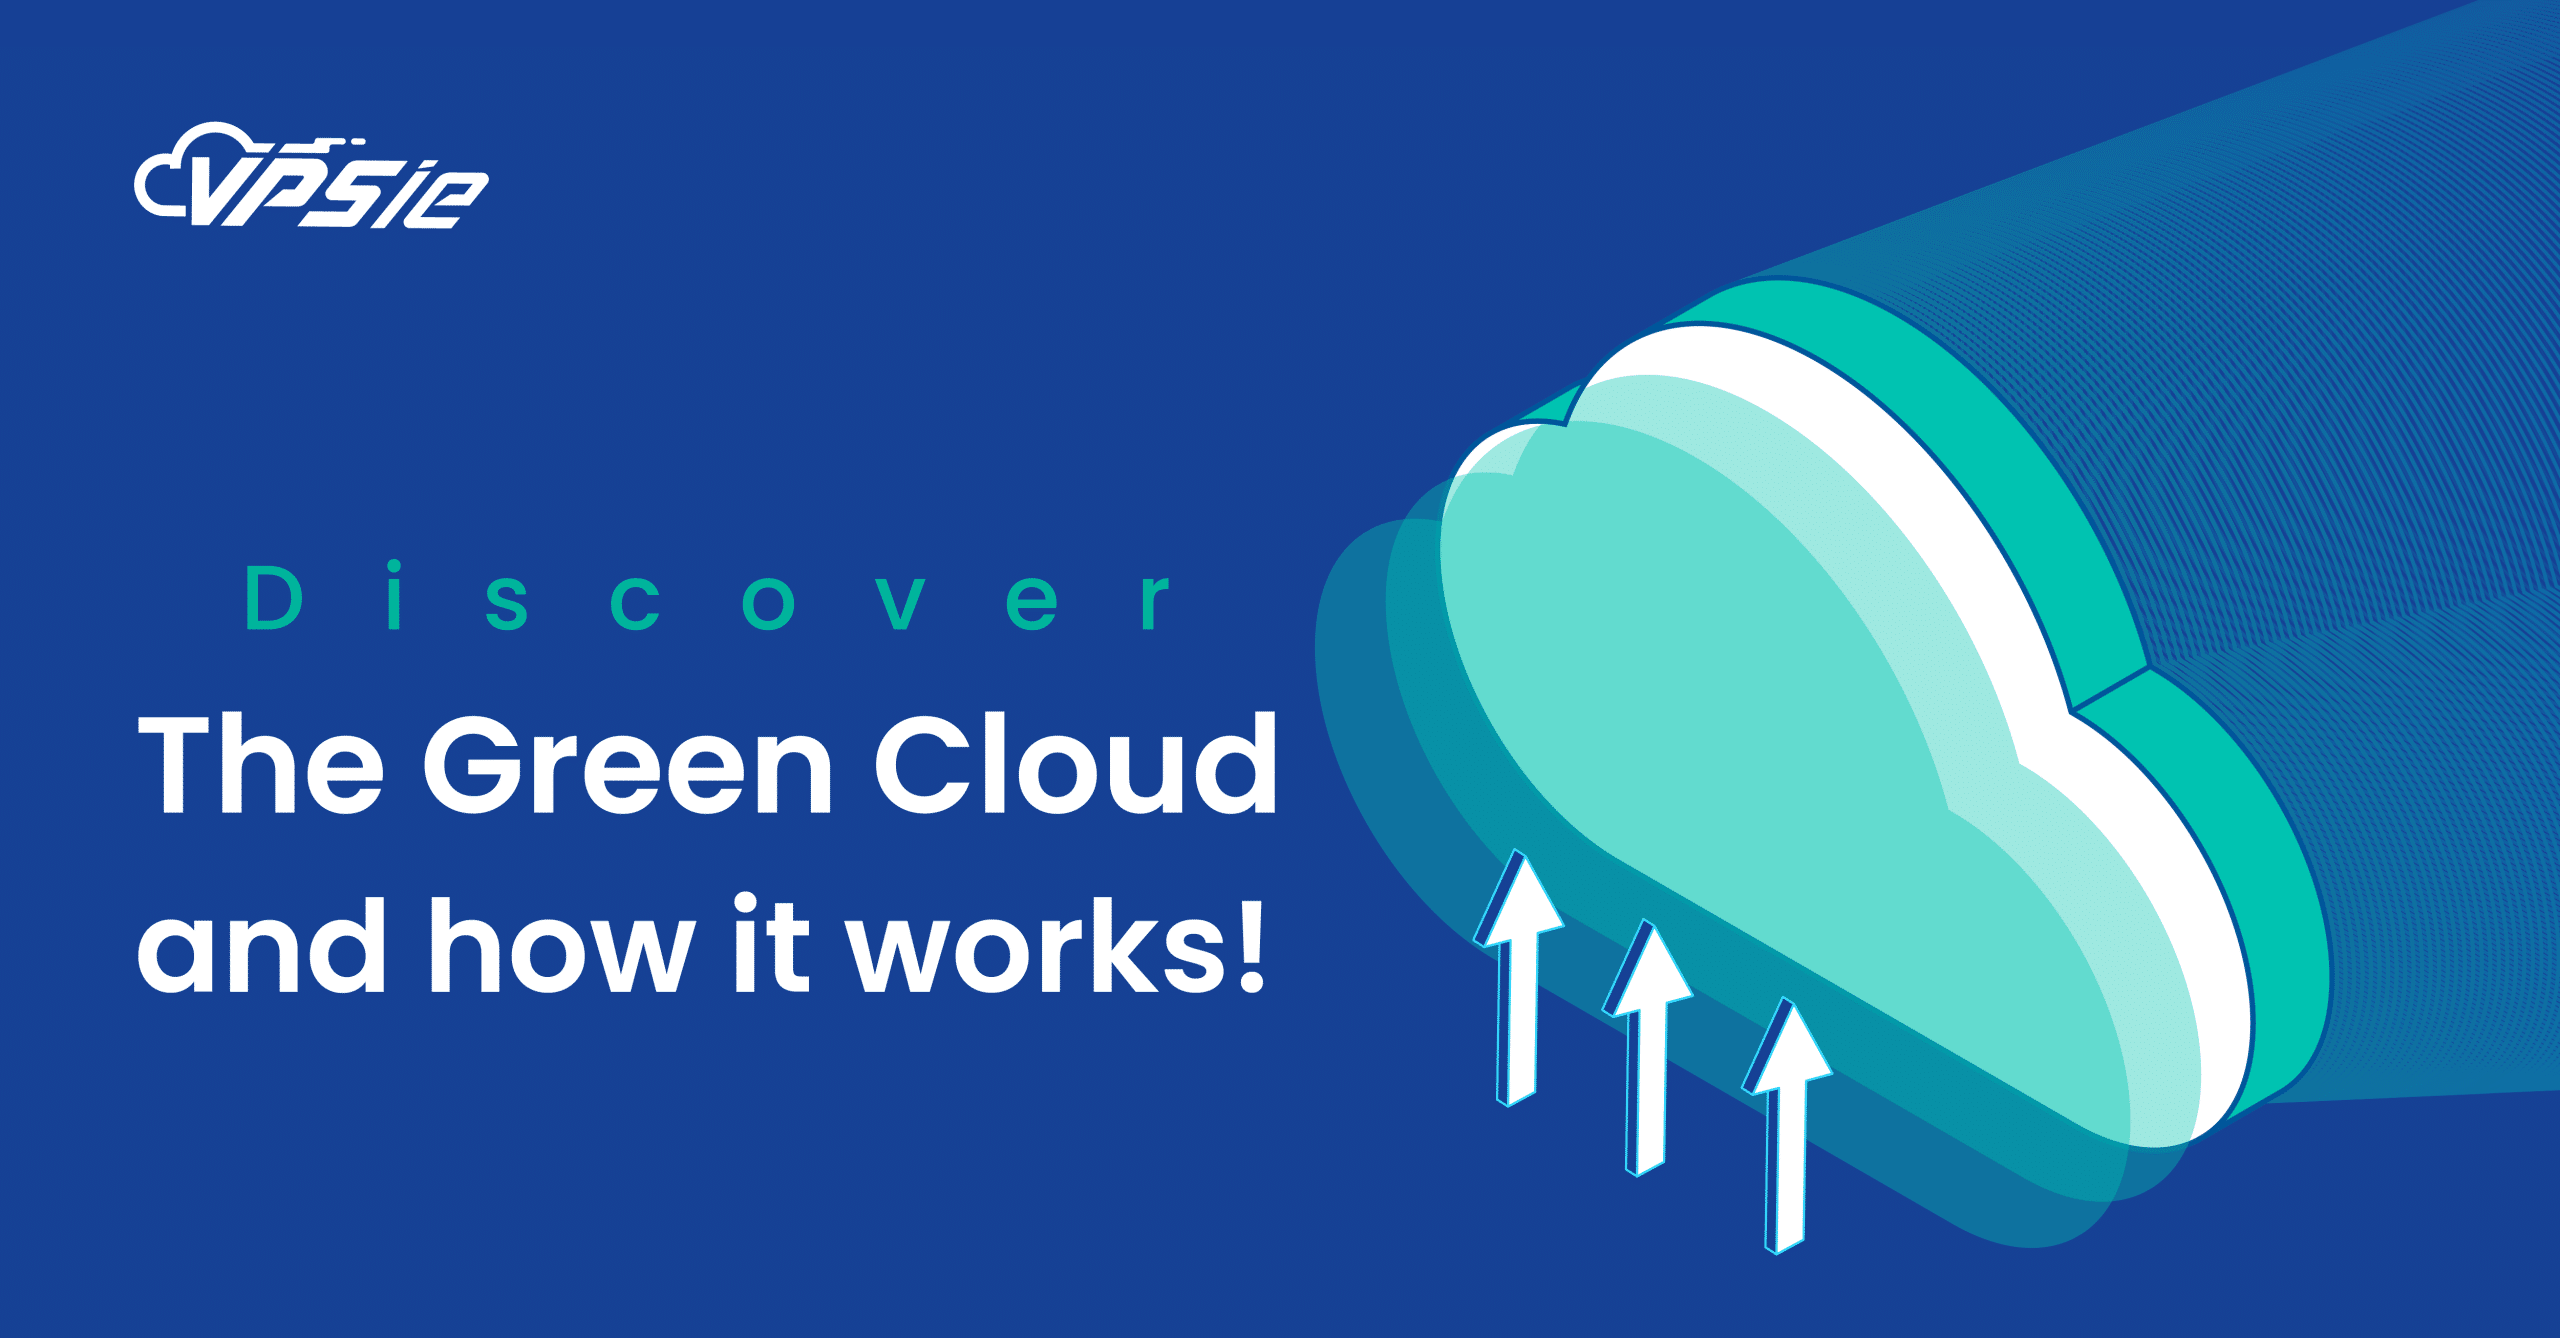 Discover the green cloud